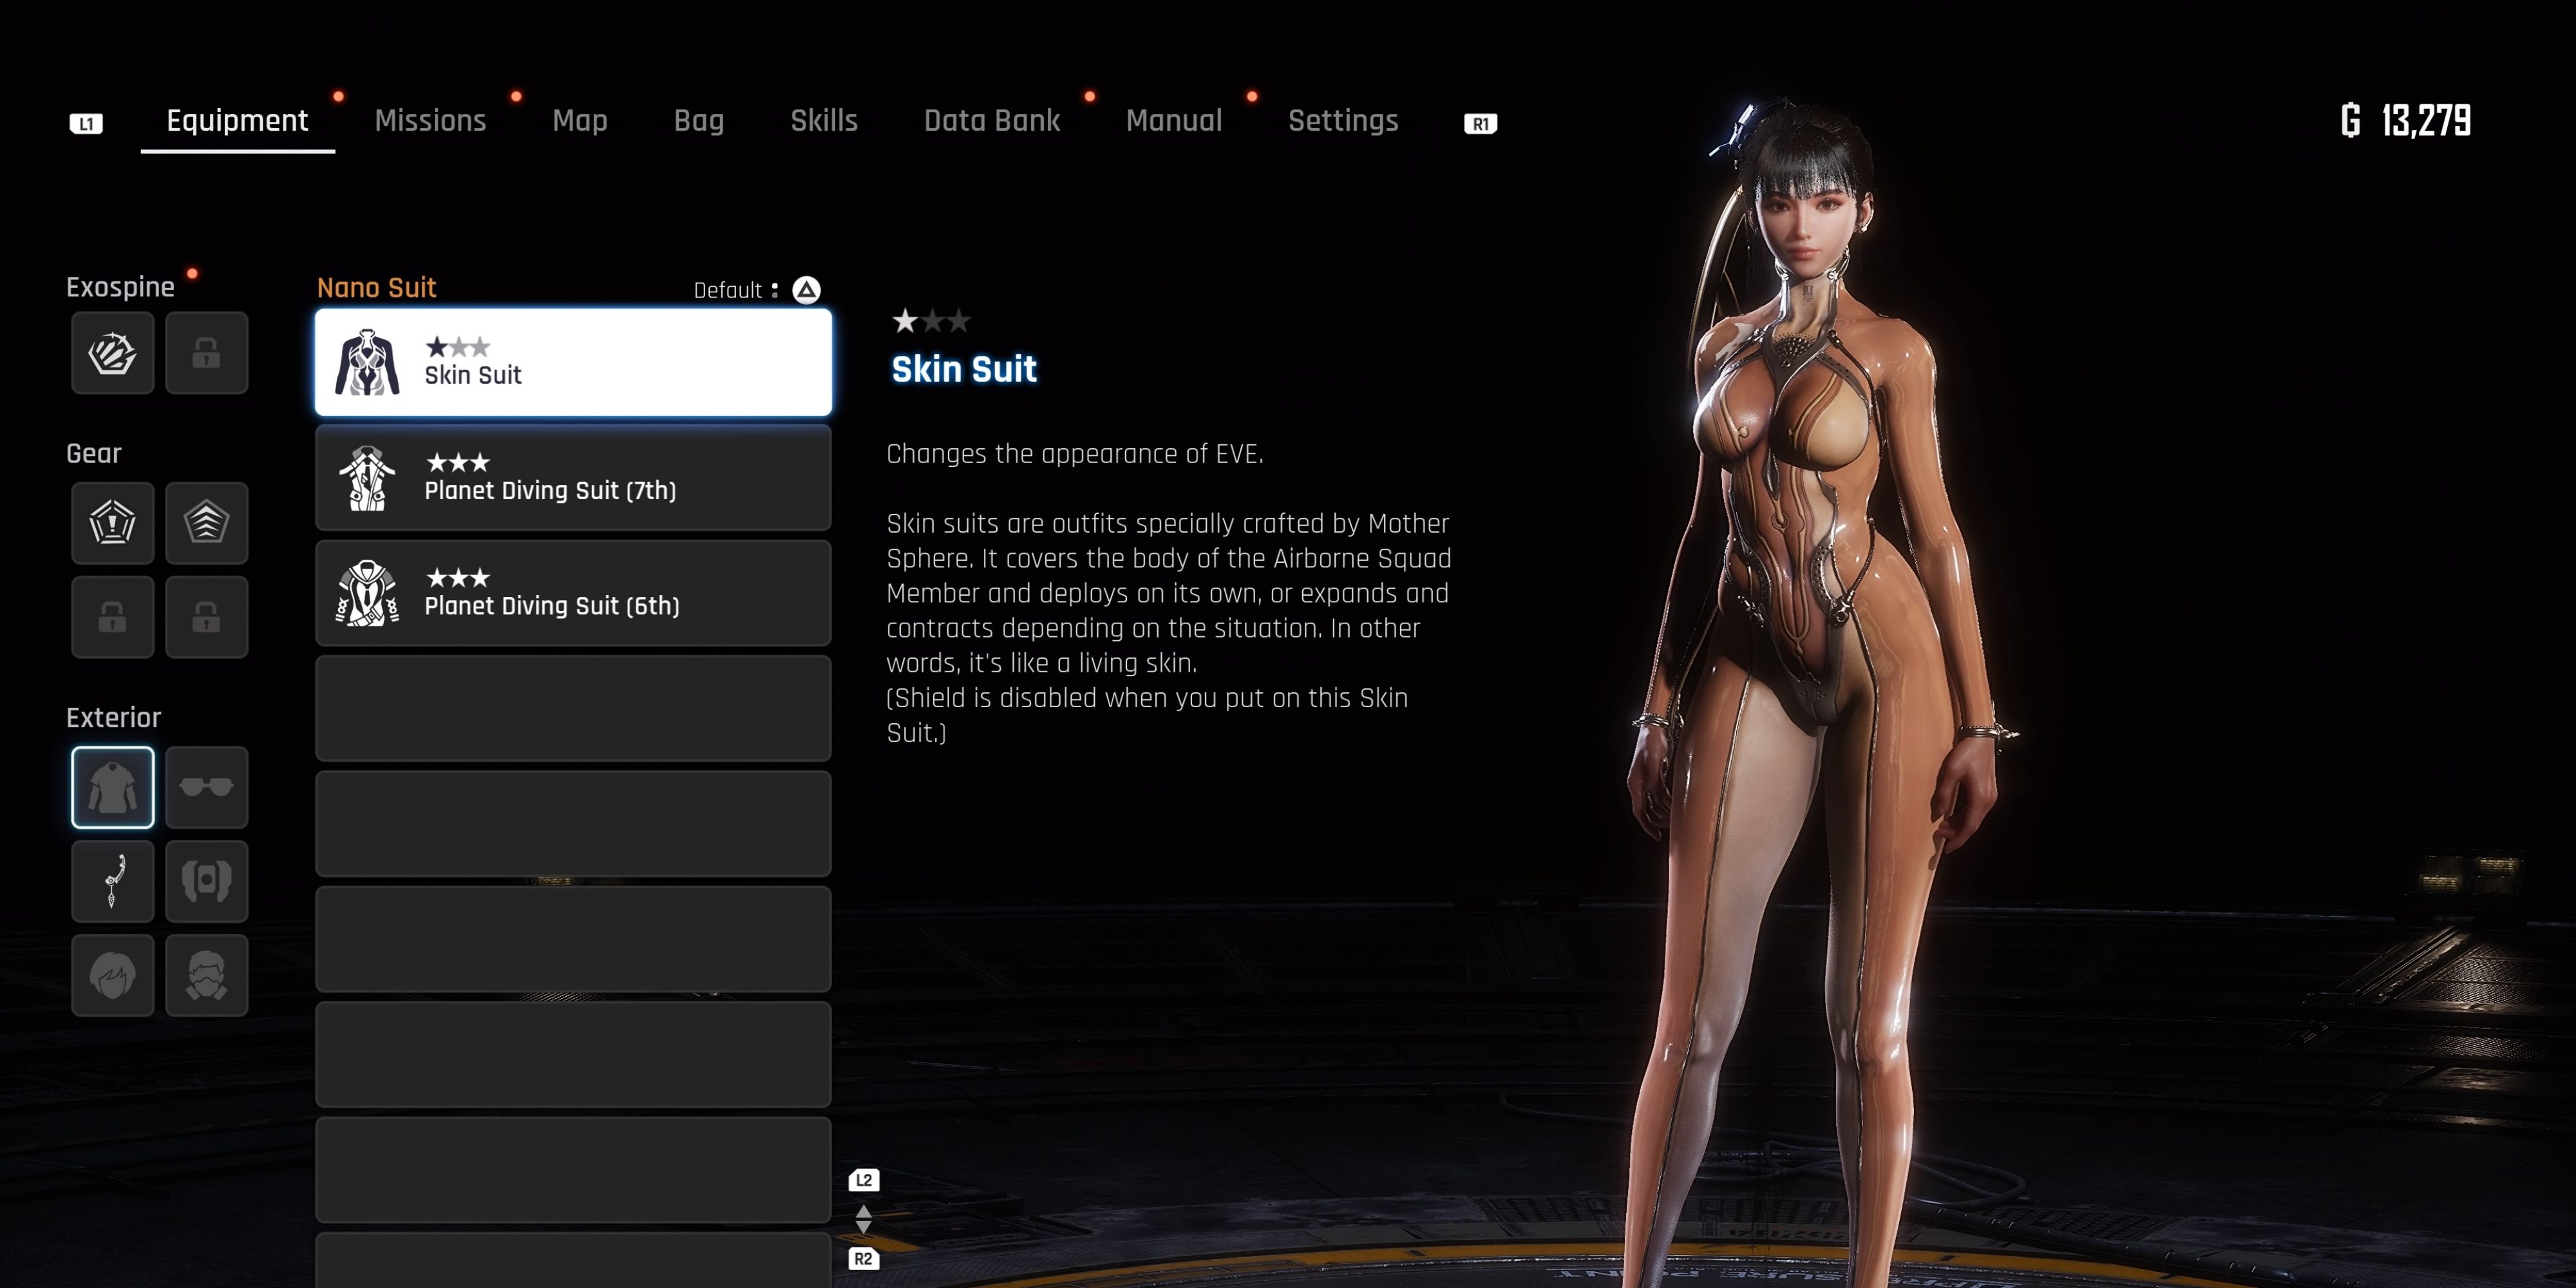 Stellar Blade: How To Get Skin Suit For EVE